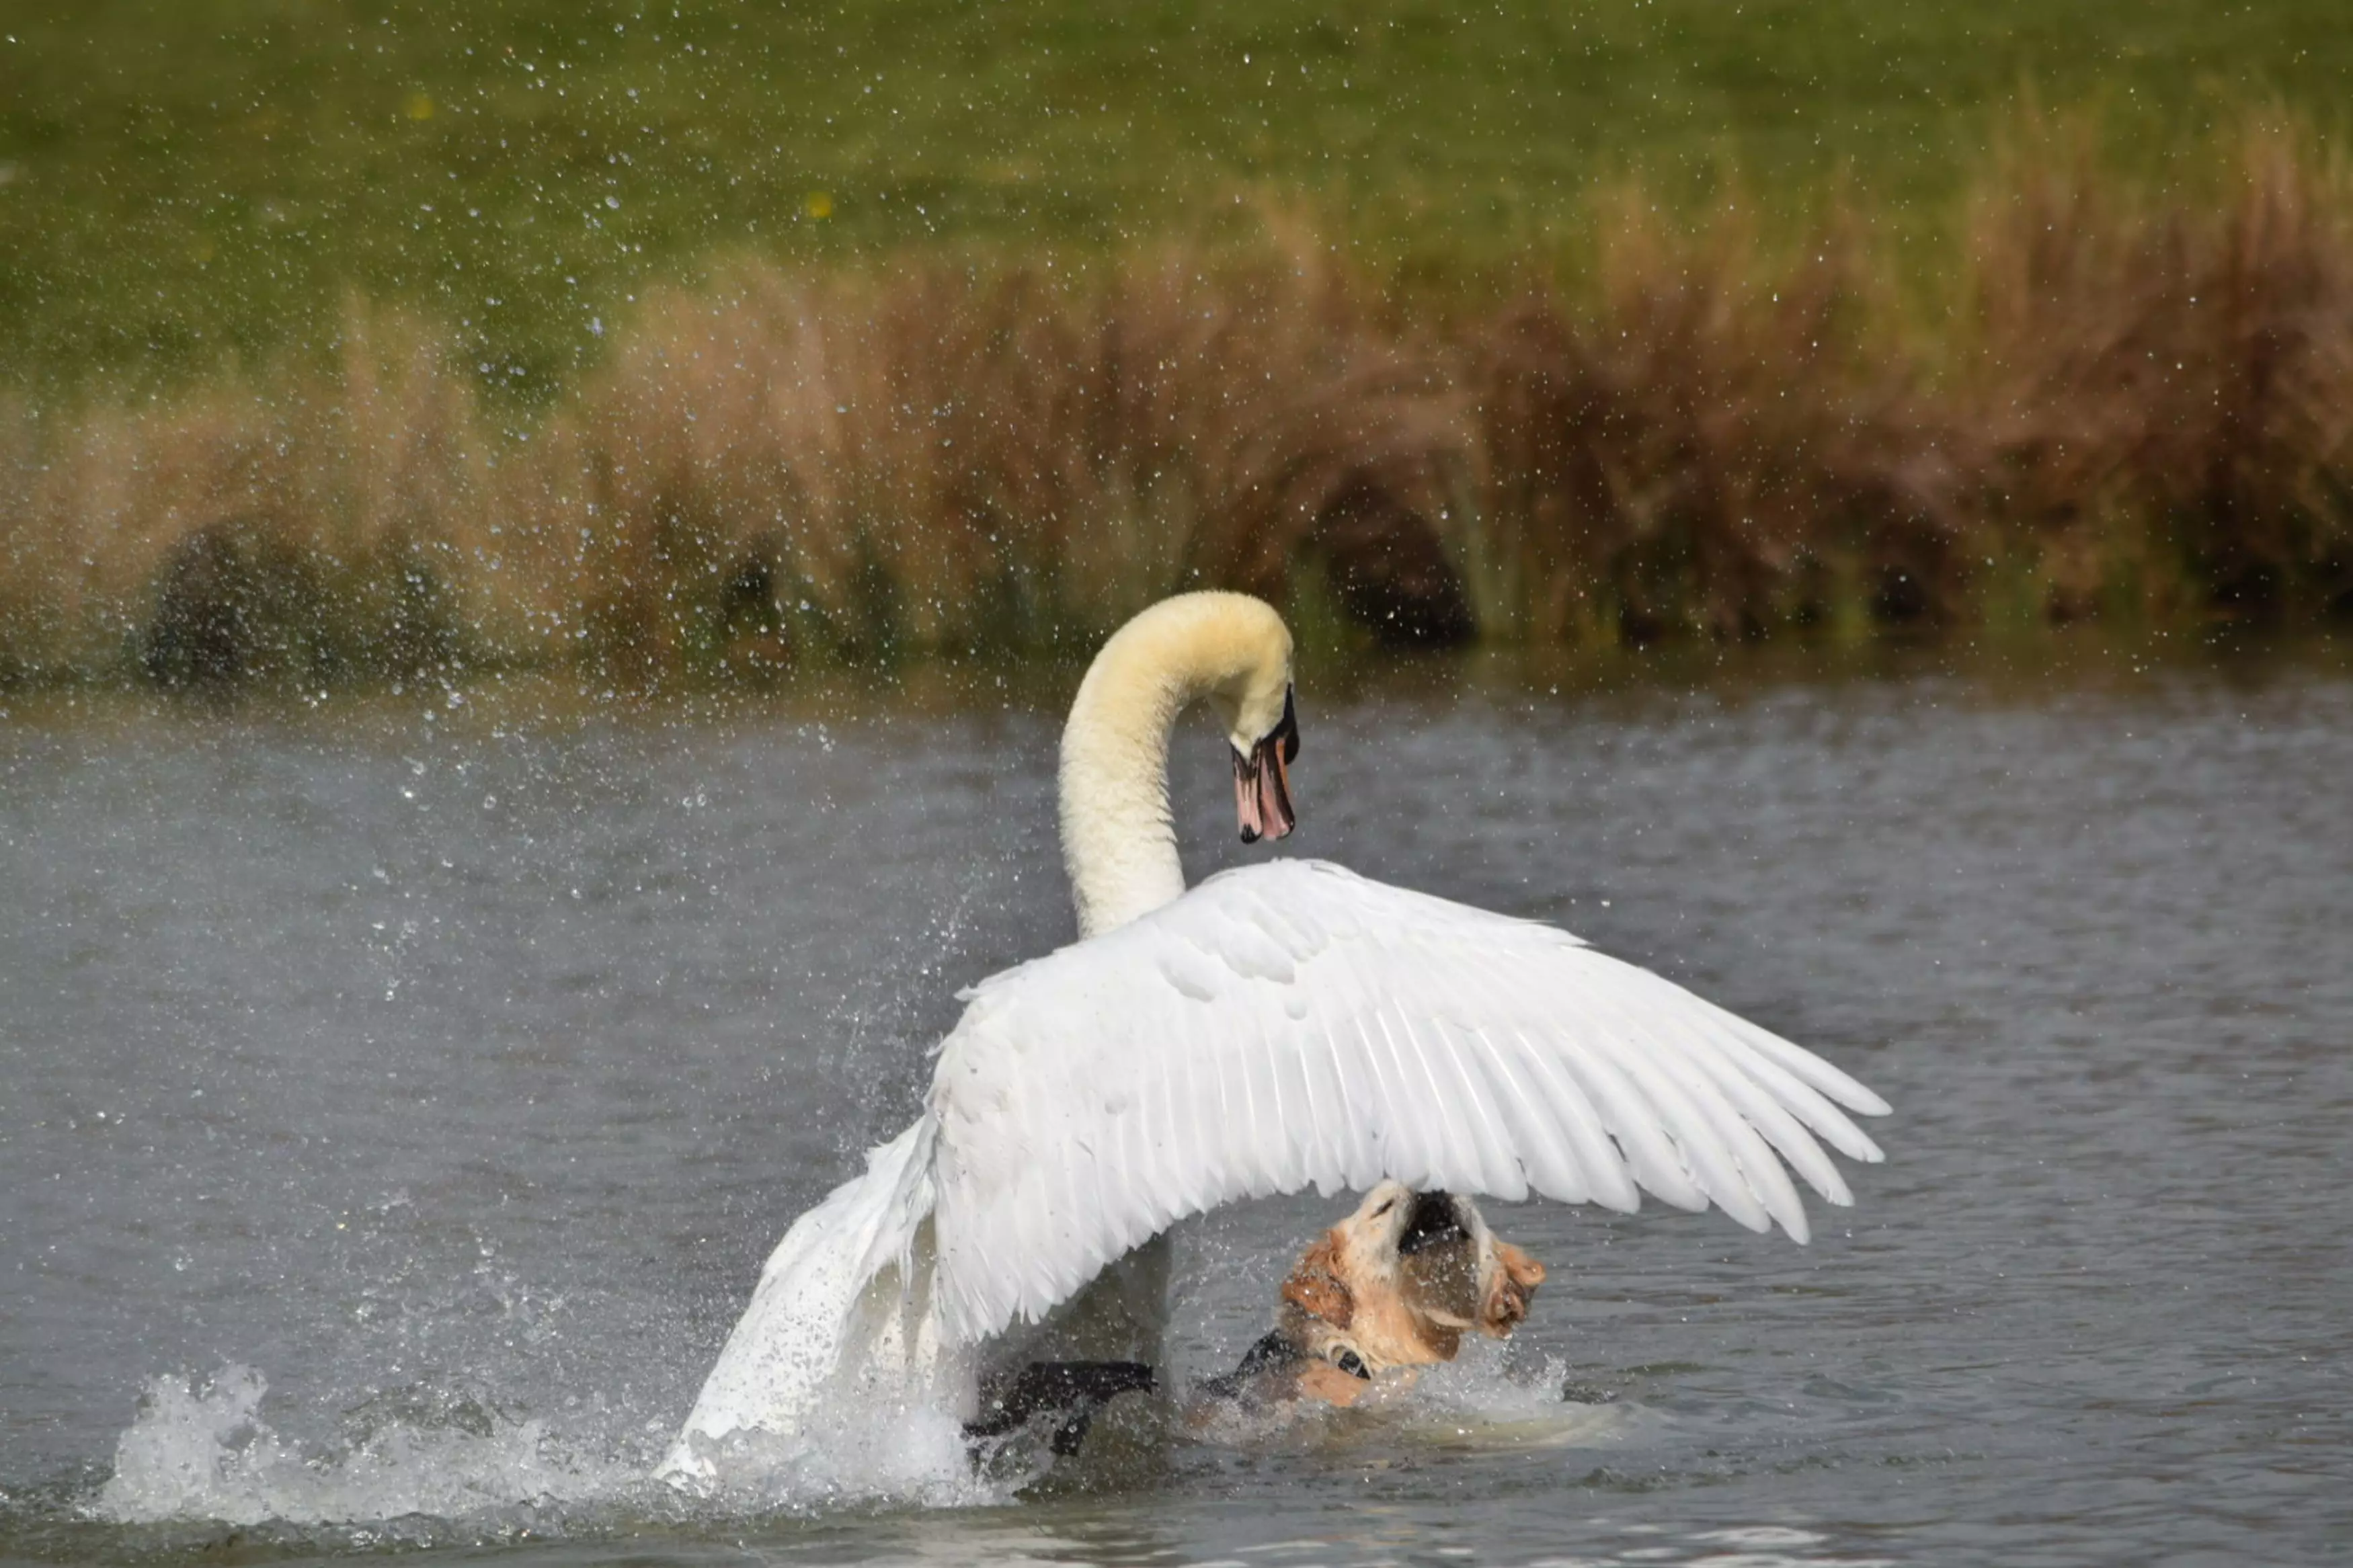 The swan lunged at the paddling dog (